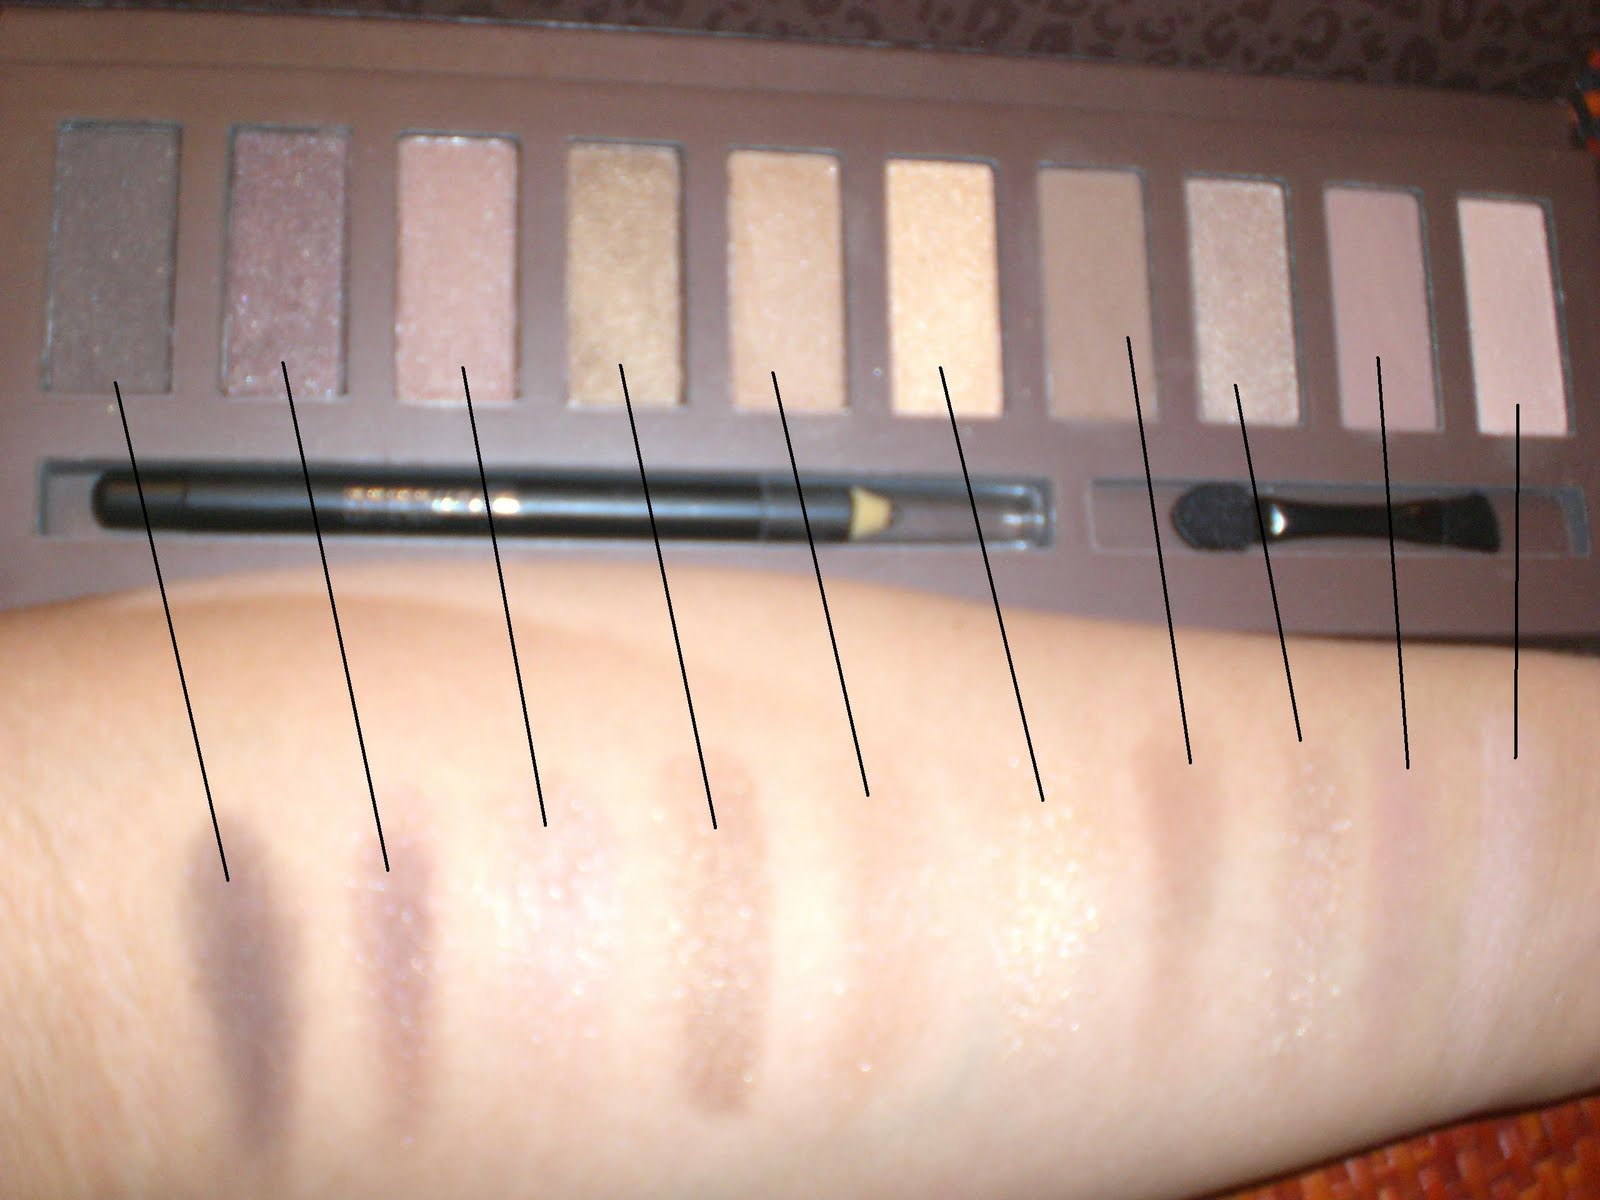 Swatches of Natural Palette: